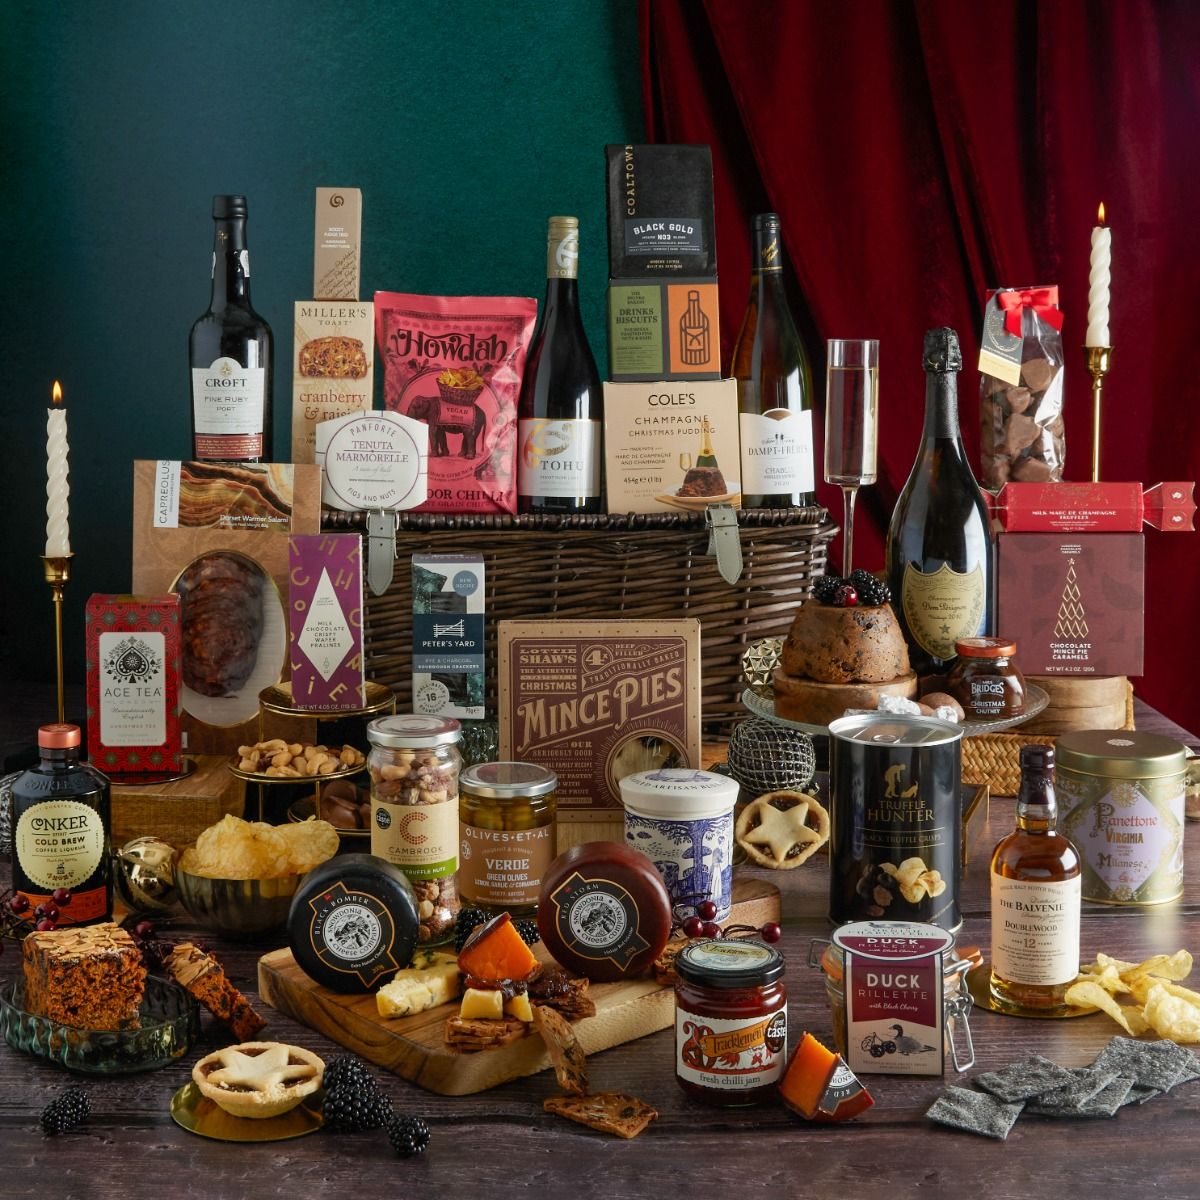 The Ultimate Christmas Hamper with contents on display